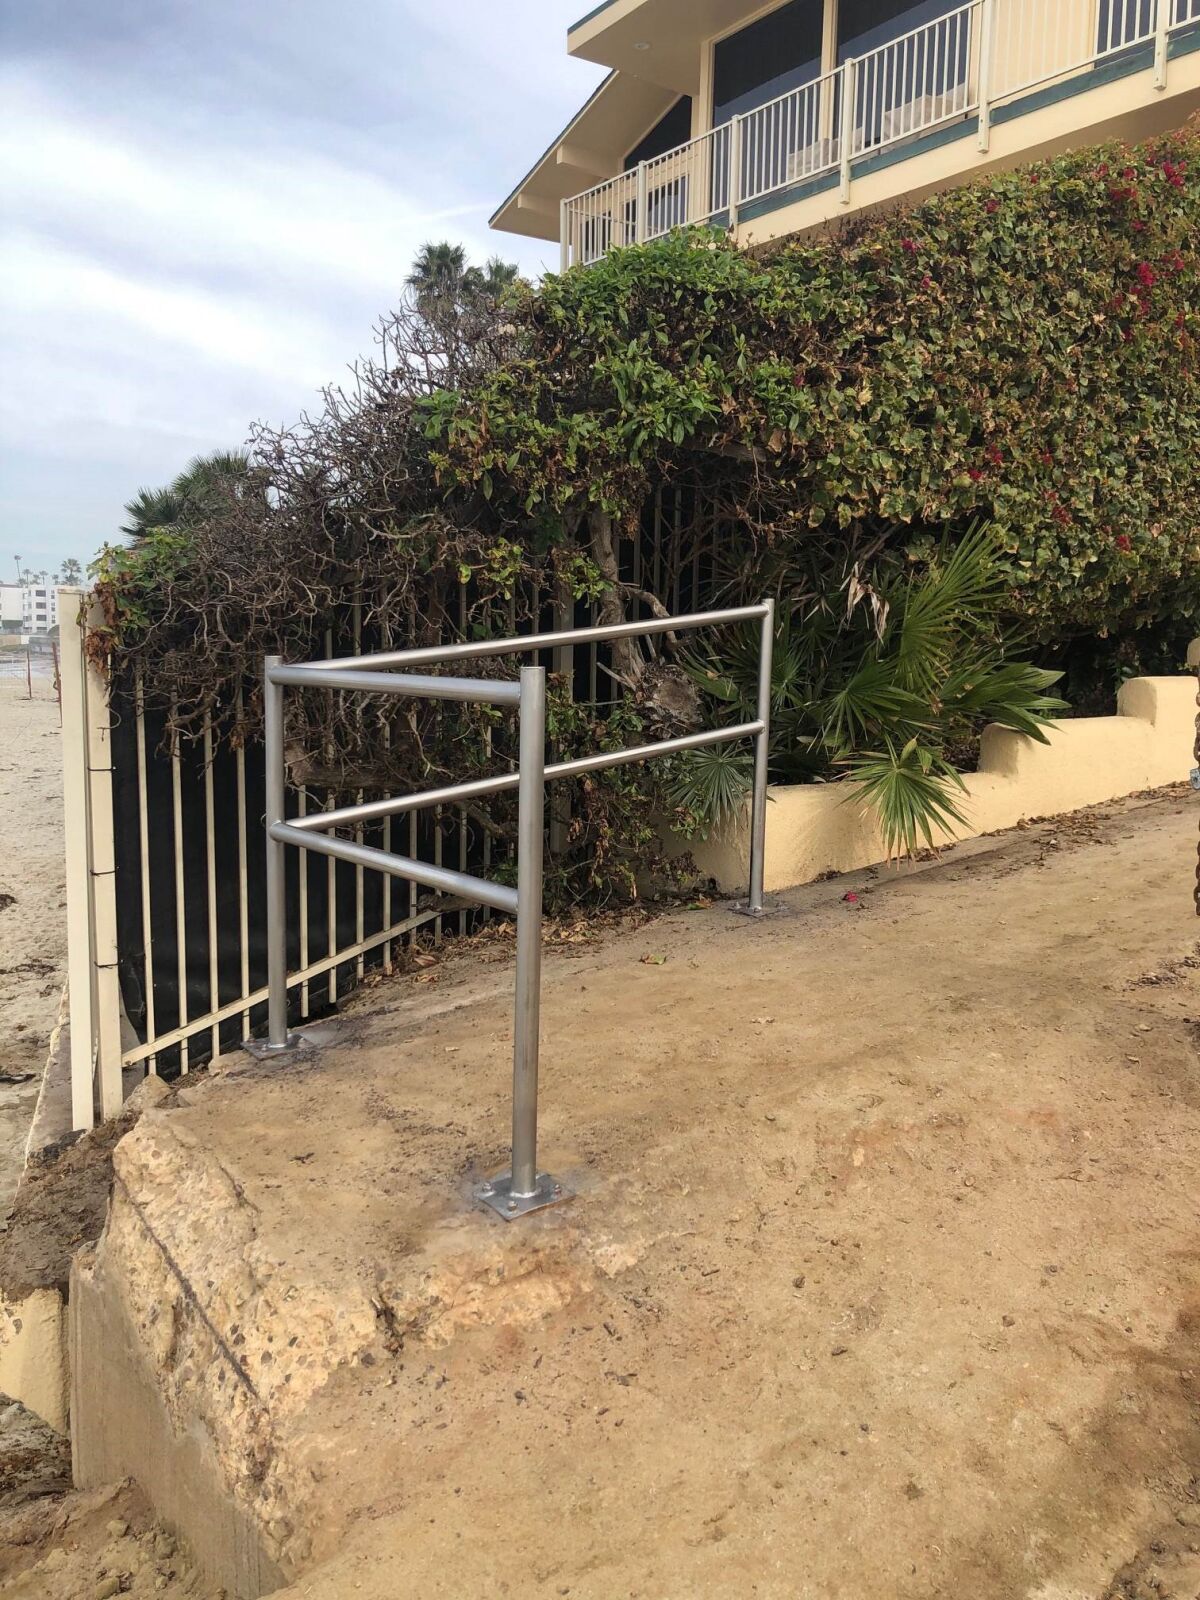 A railing at the Sea Lane overlook was replaced with the help of the La Jolla Parks & Beaches board.